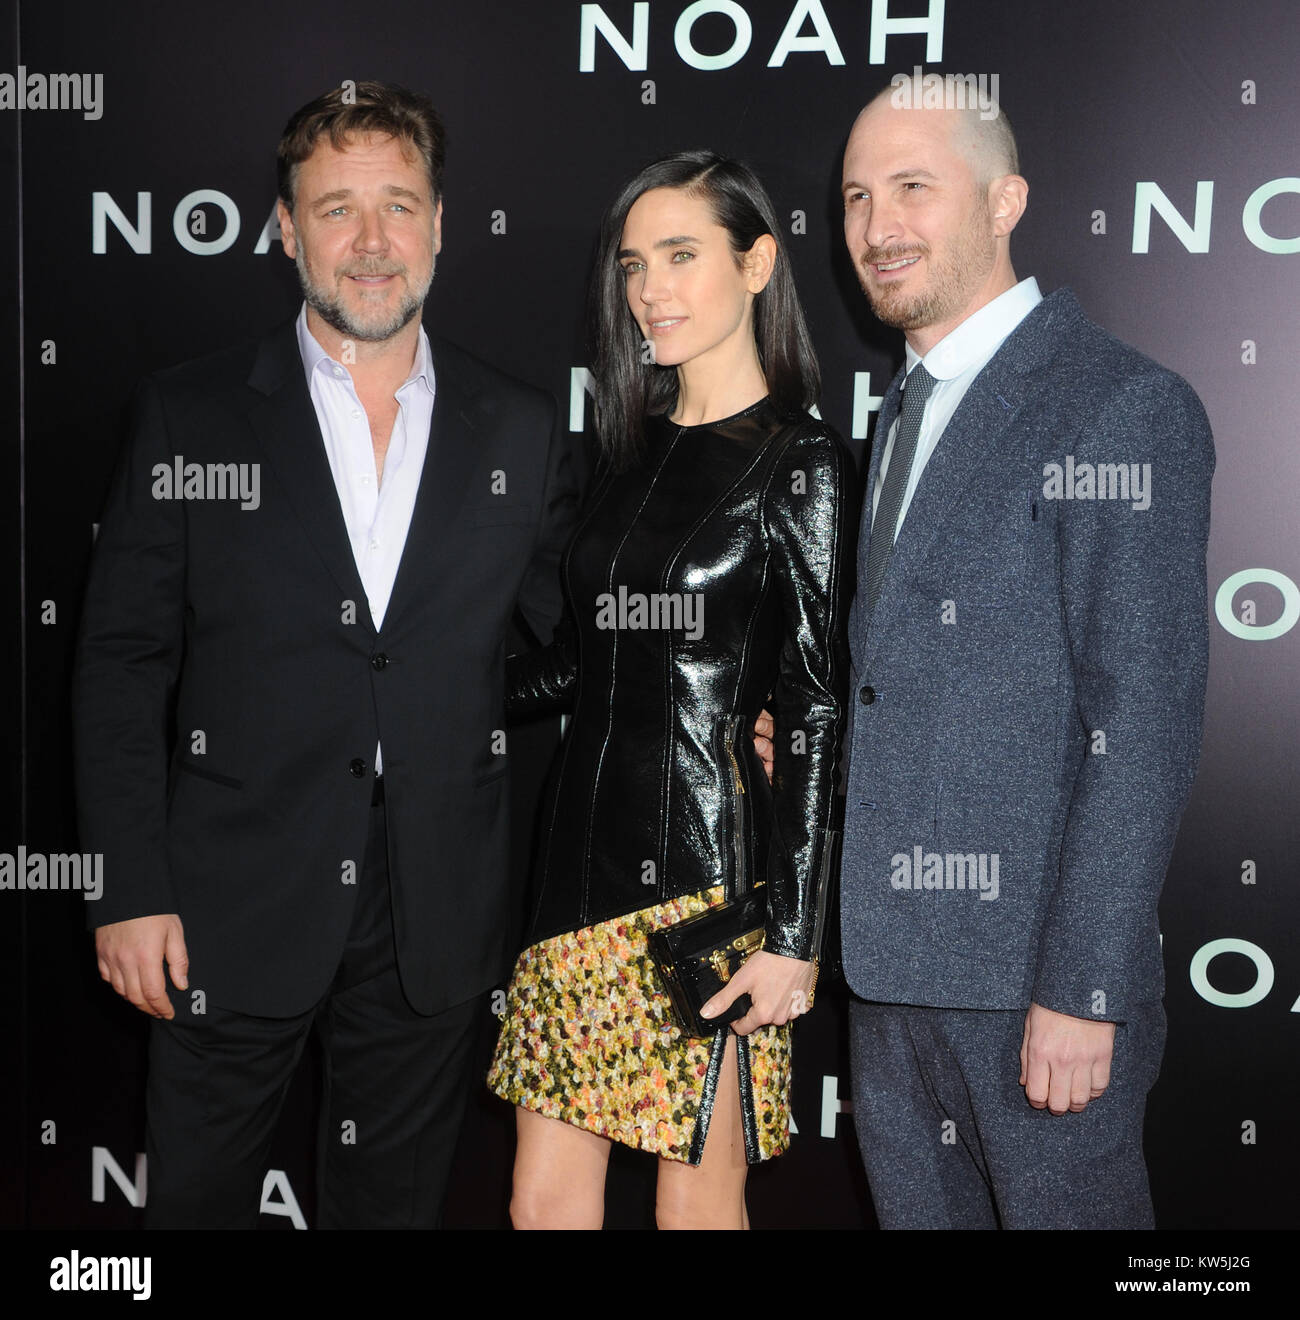 NEW YORK, NY - MARCH 26:  Russell Crowe Jennifer Connelly Darren Aronofsky attends the New York Premiere of 'Noah' at Clearview Ziegfeld Theatre on March 26, 2014 in New York City  People:  Russell Crowe Jennifer Connelly Darren Aronofsky Stock Photo